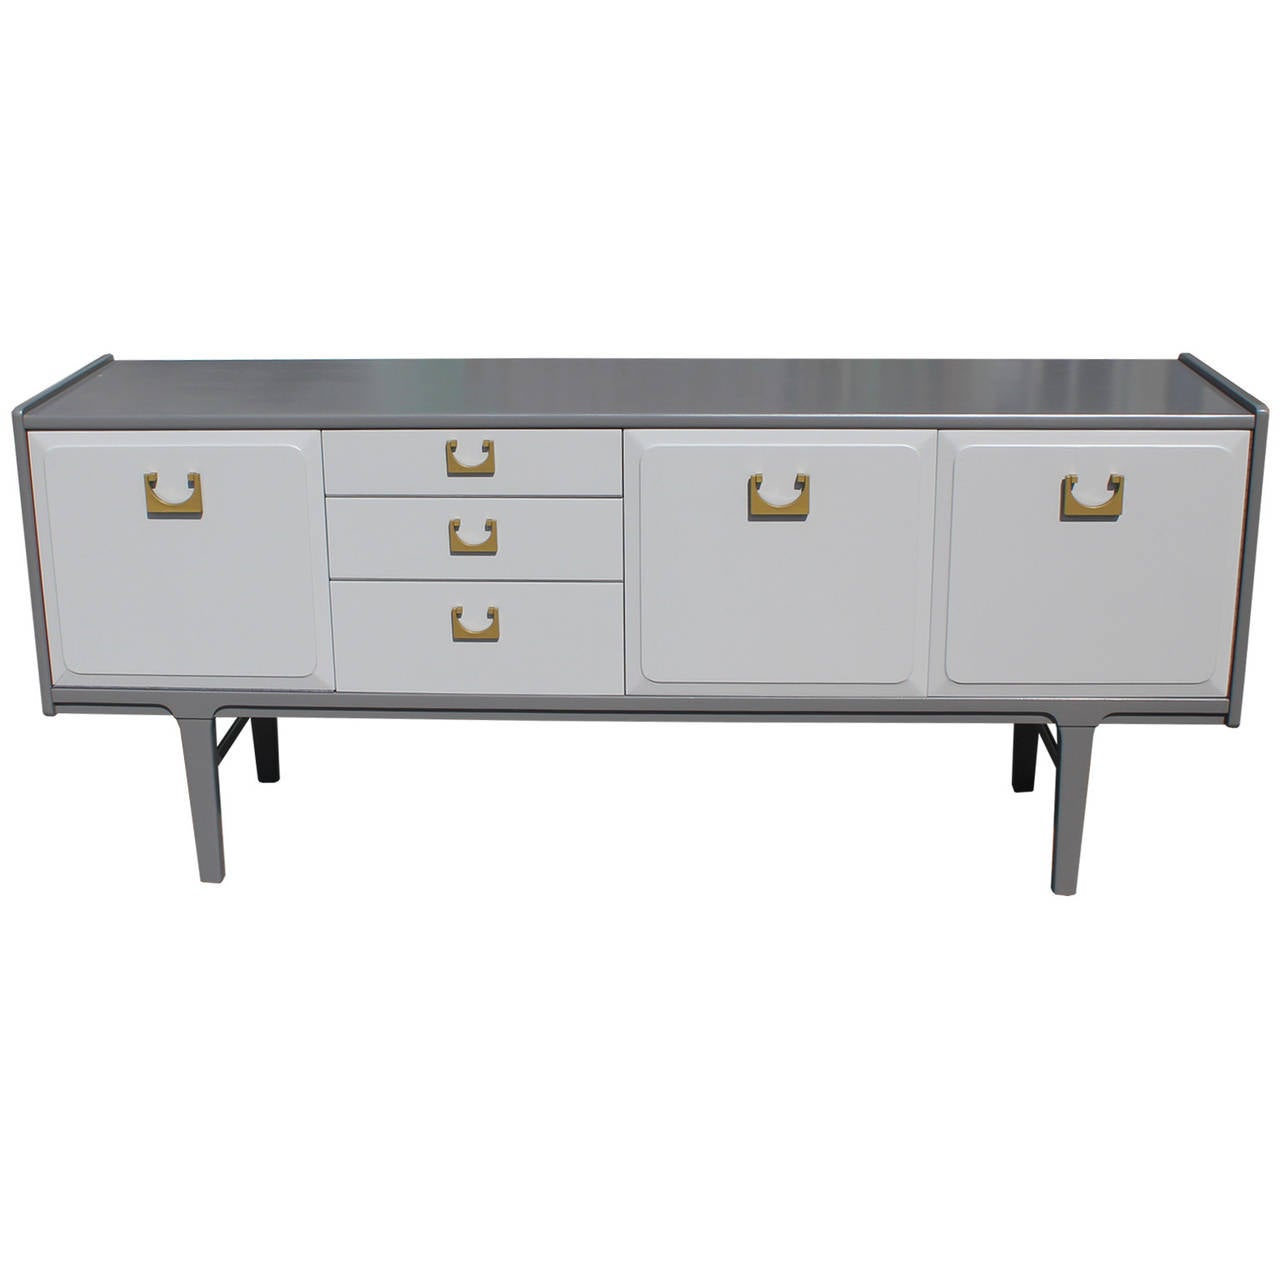 European Incredible Two Tone Grey Sideboard with Brass Handles